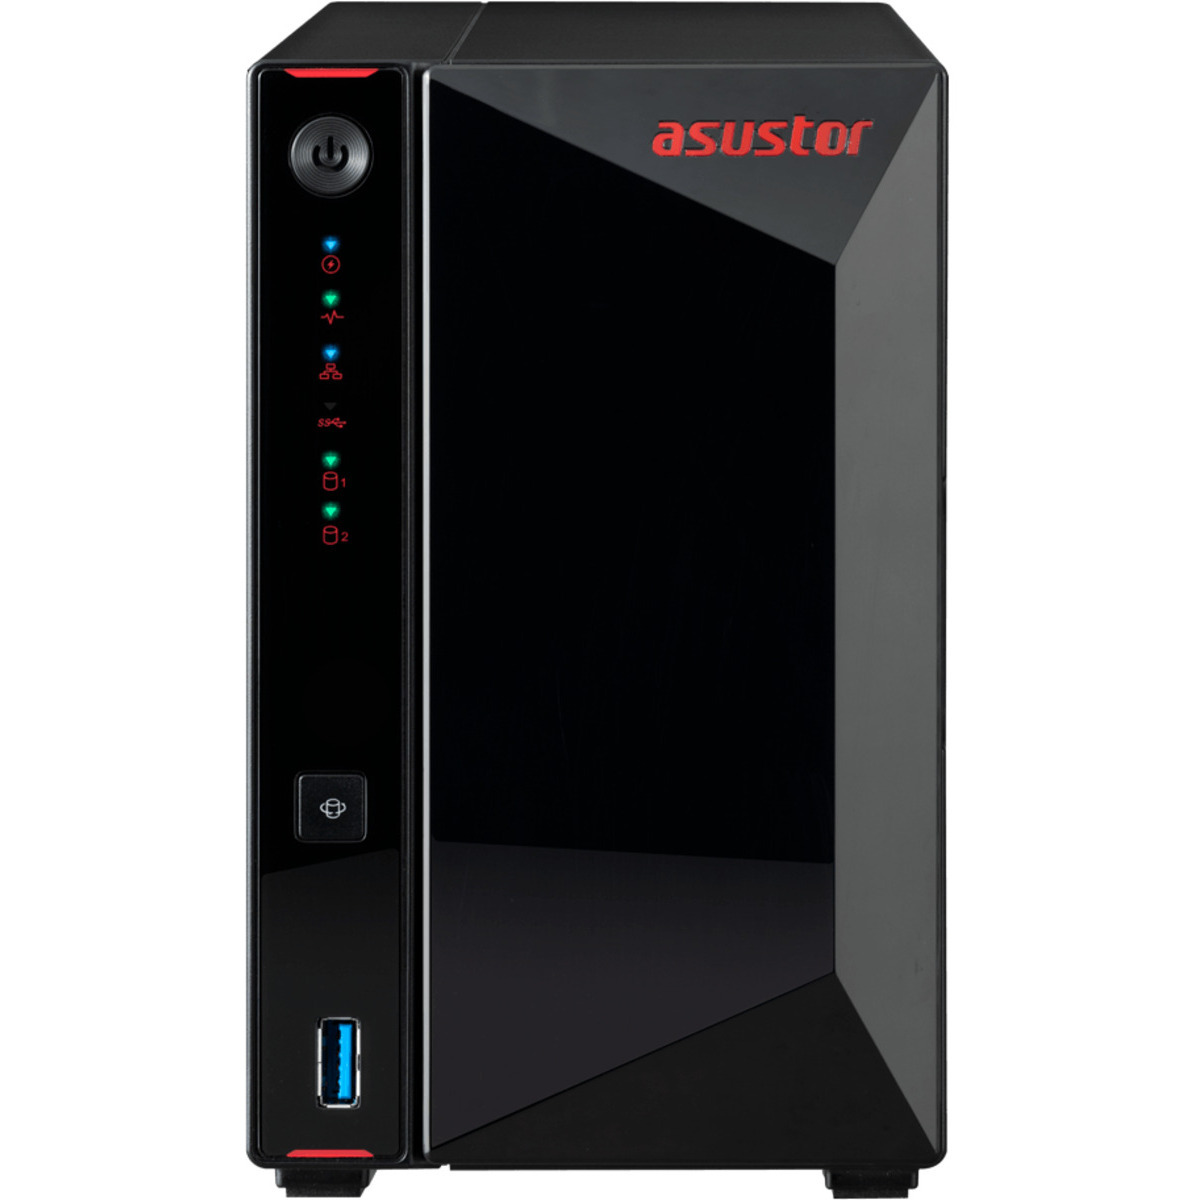 buy $936 ASUSTOR AS5202T Nimbustor 20tb Desktop NAS - Network Attached Storage Device 2x10000gb Seagate IronWolf ST10000VN0008 3.5 7200rpm SATA 6Gb/s HDD NAS Class Drives Installed - Burn-In Tested - FREE RAM UPGRADE - nas headquarters buy network attached storage server device das new raid-5 free shipping usa AS5202T Nimbustor